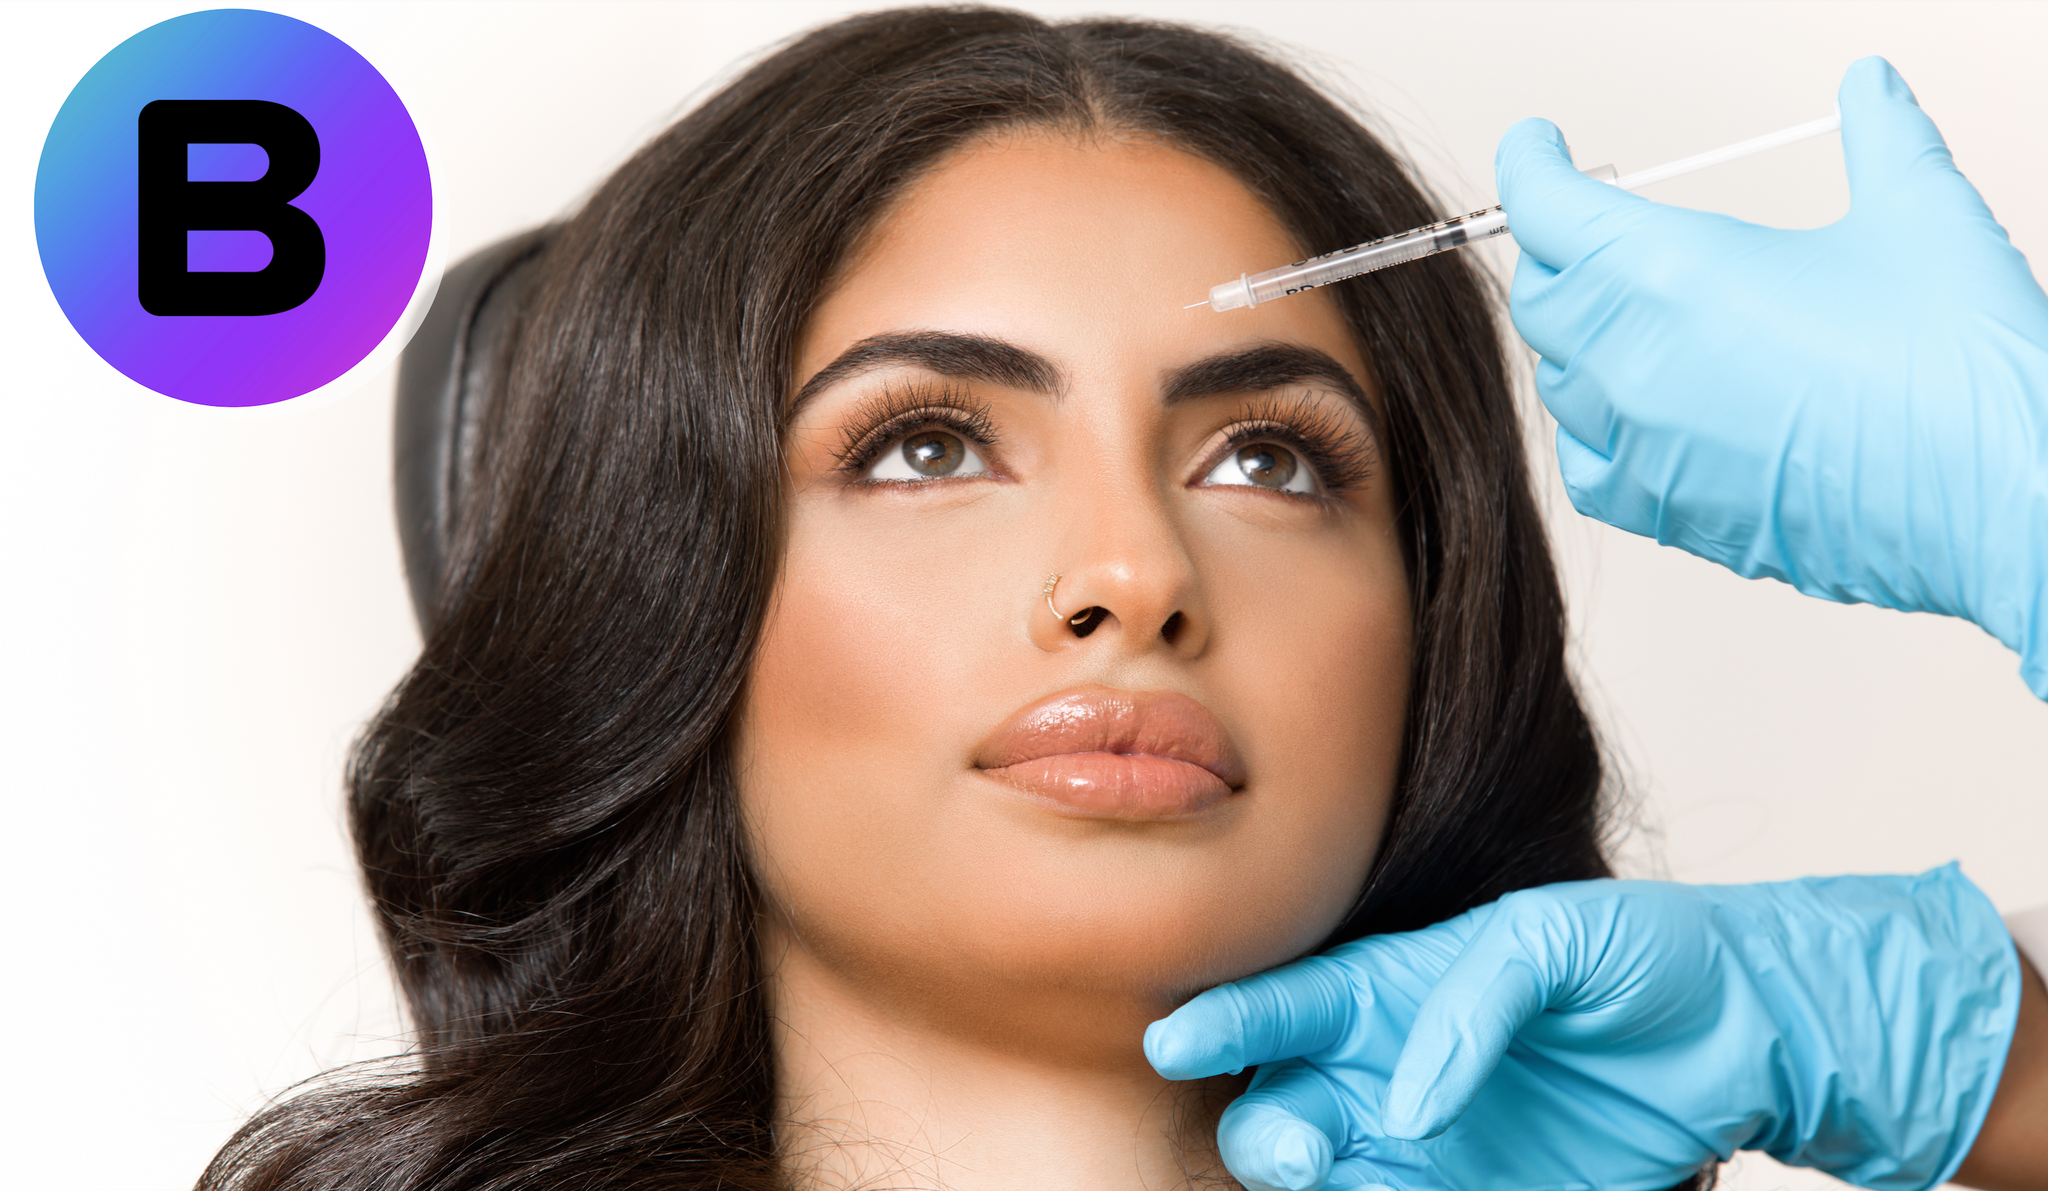 Win FREE BOTOX for National Botox Day!